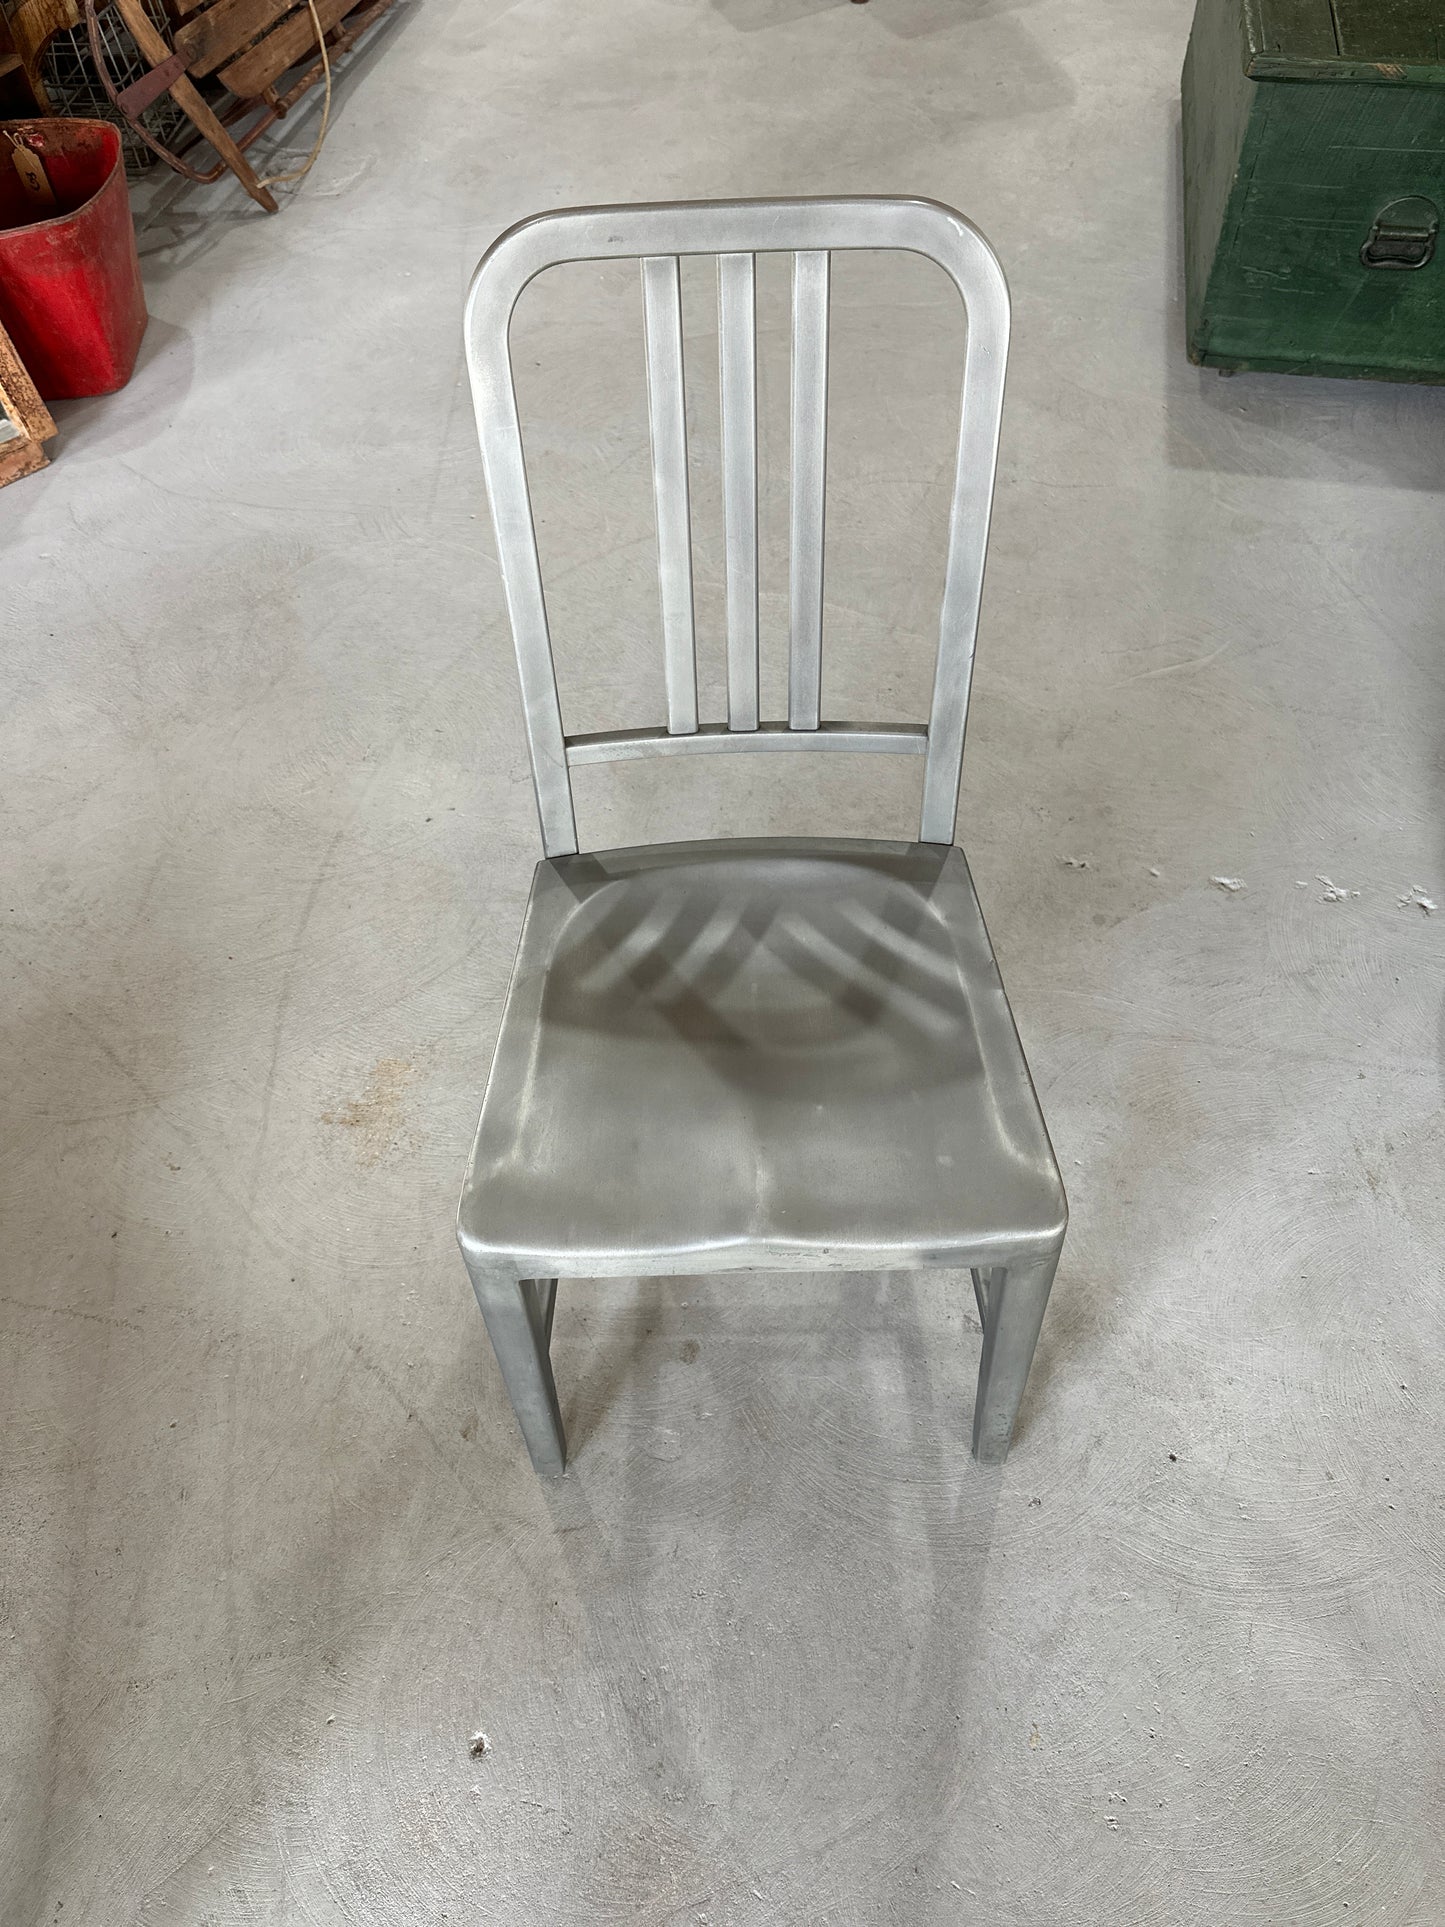 Good Form Set of 4 Chairs c. 1940